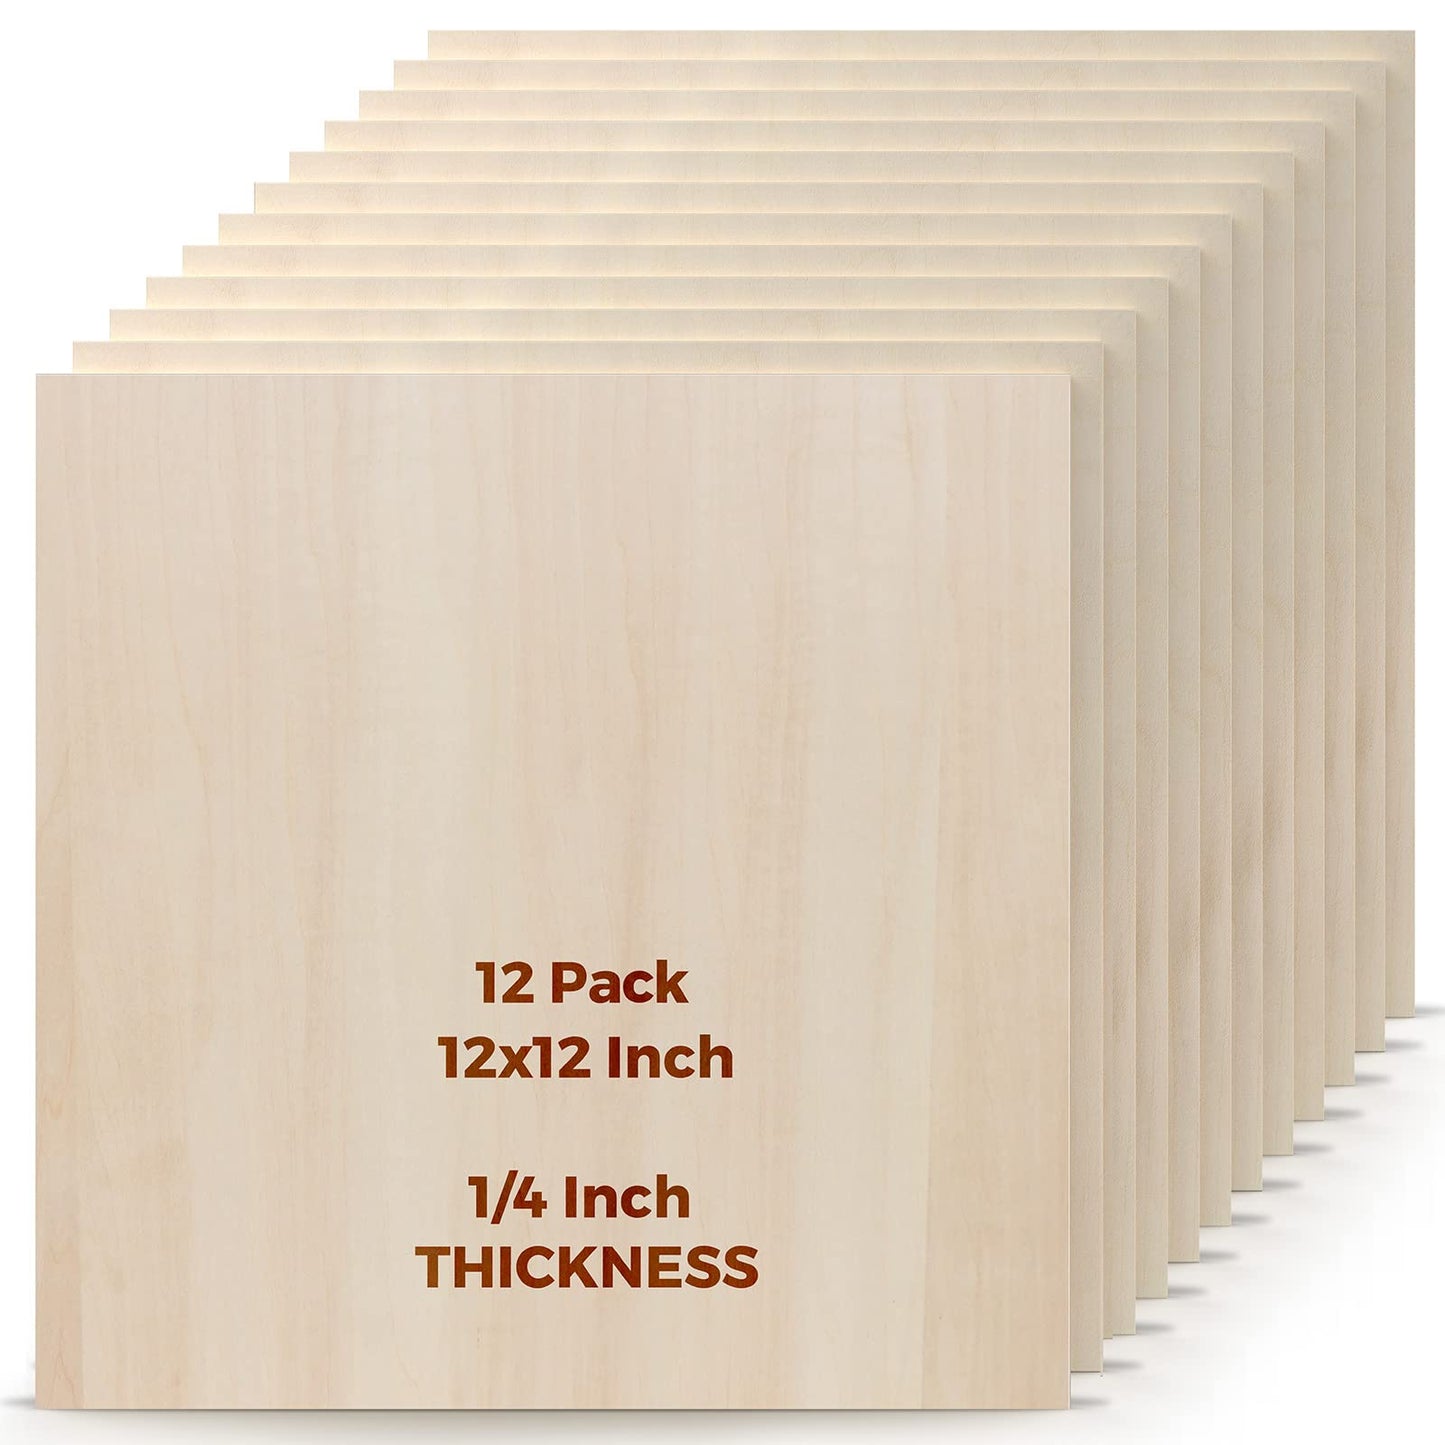 12 Pack 12 x 8 Inch Basswood Sheets 1/16 Thin Craft Plywood Sheets